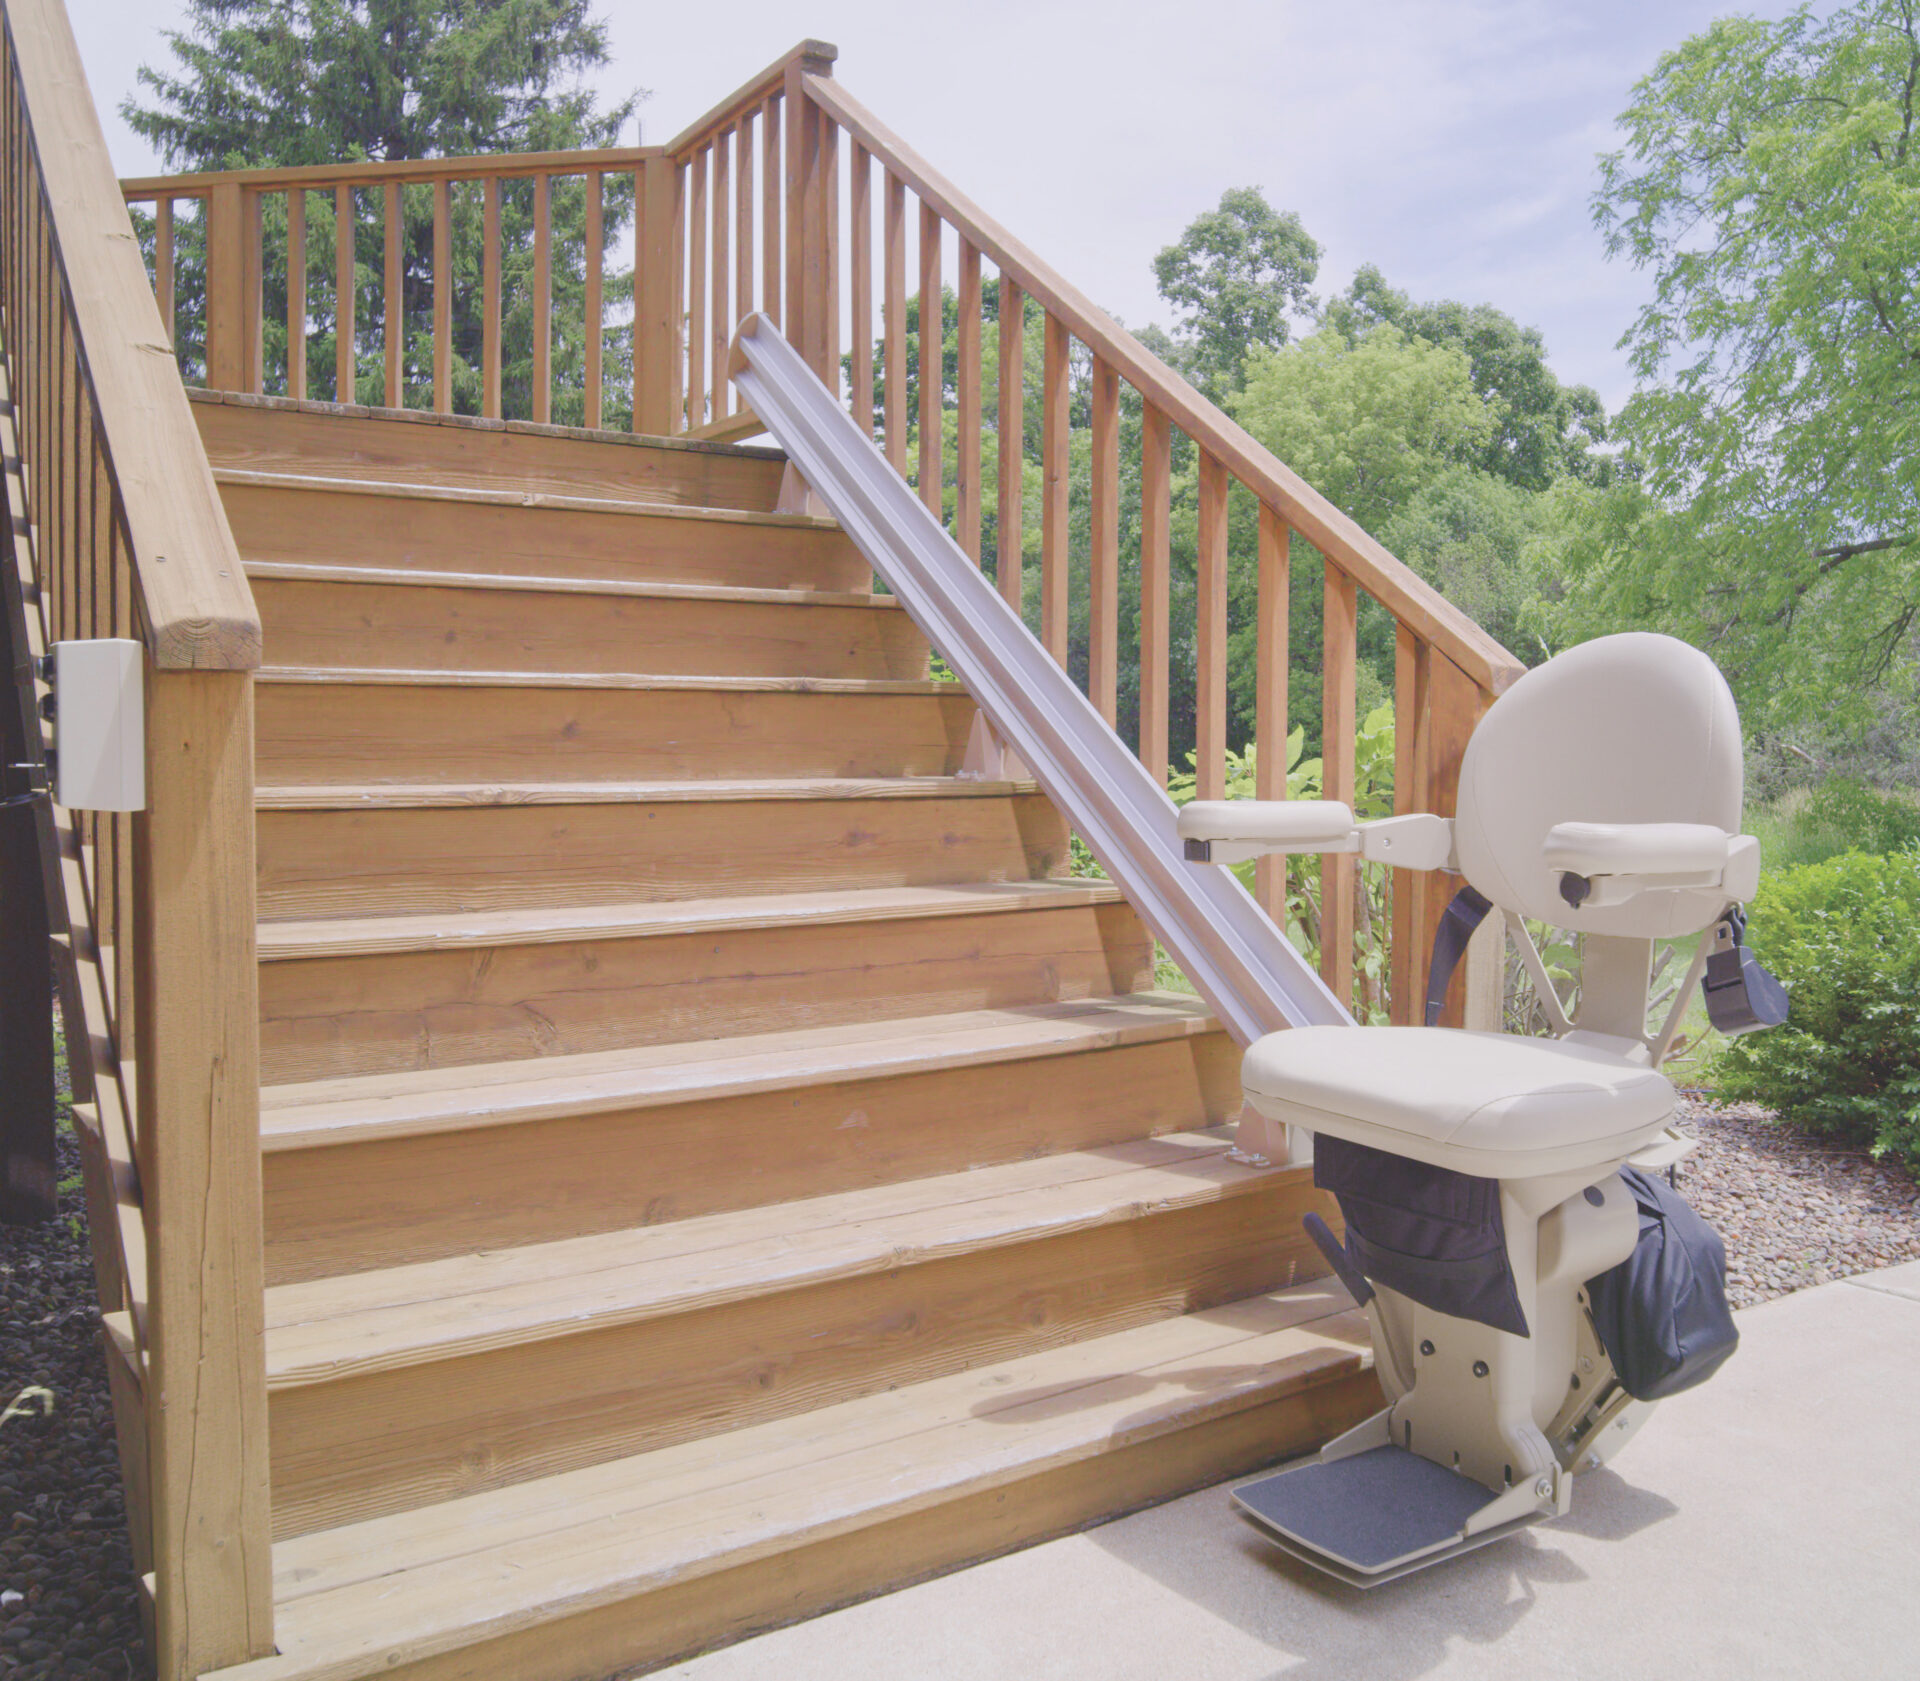 Outdoor Straight Stairlift home & bath modifications wheelchair lift mobility products